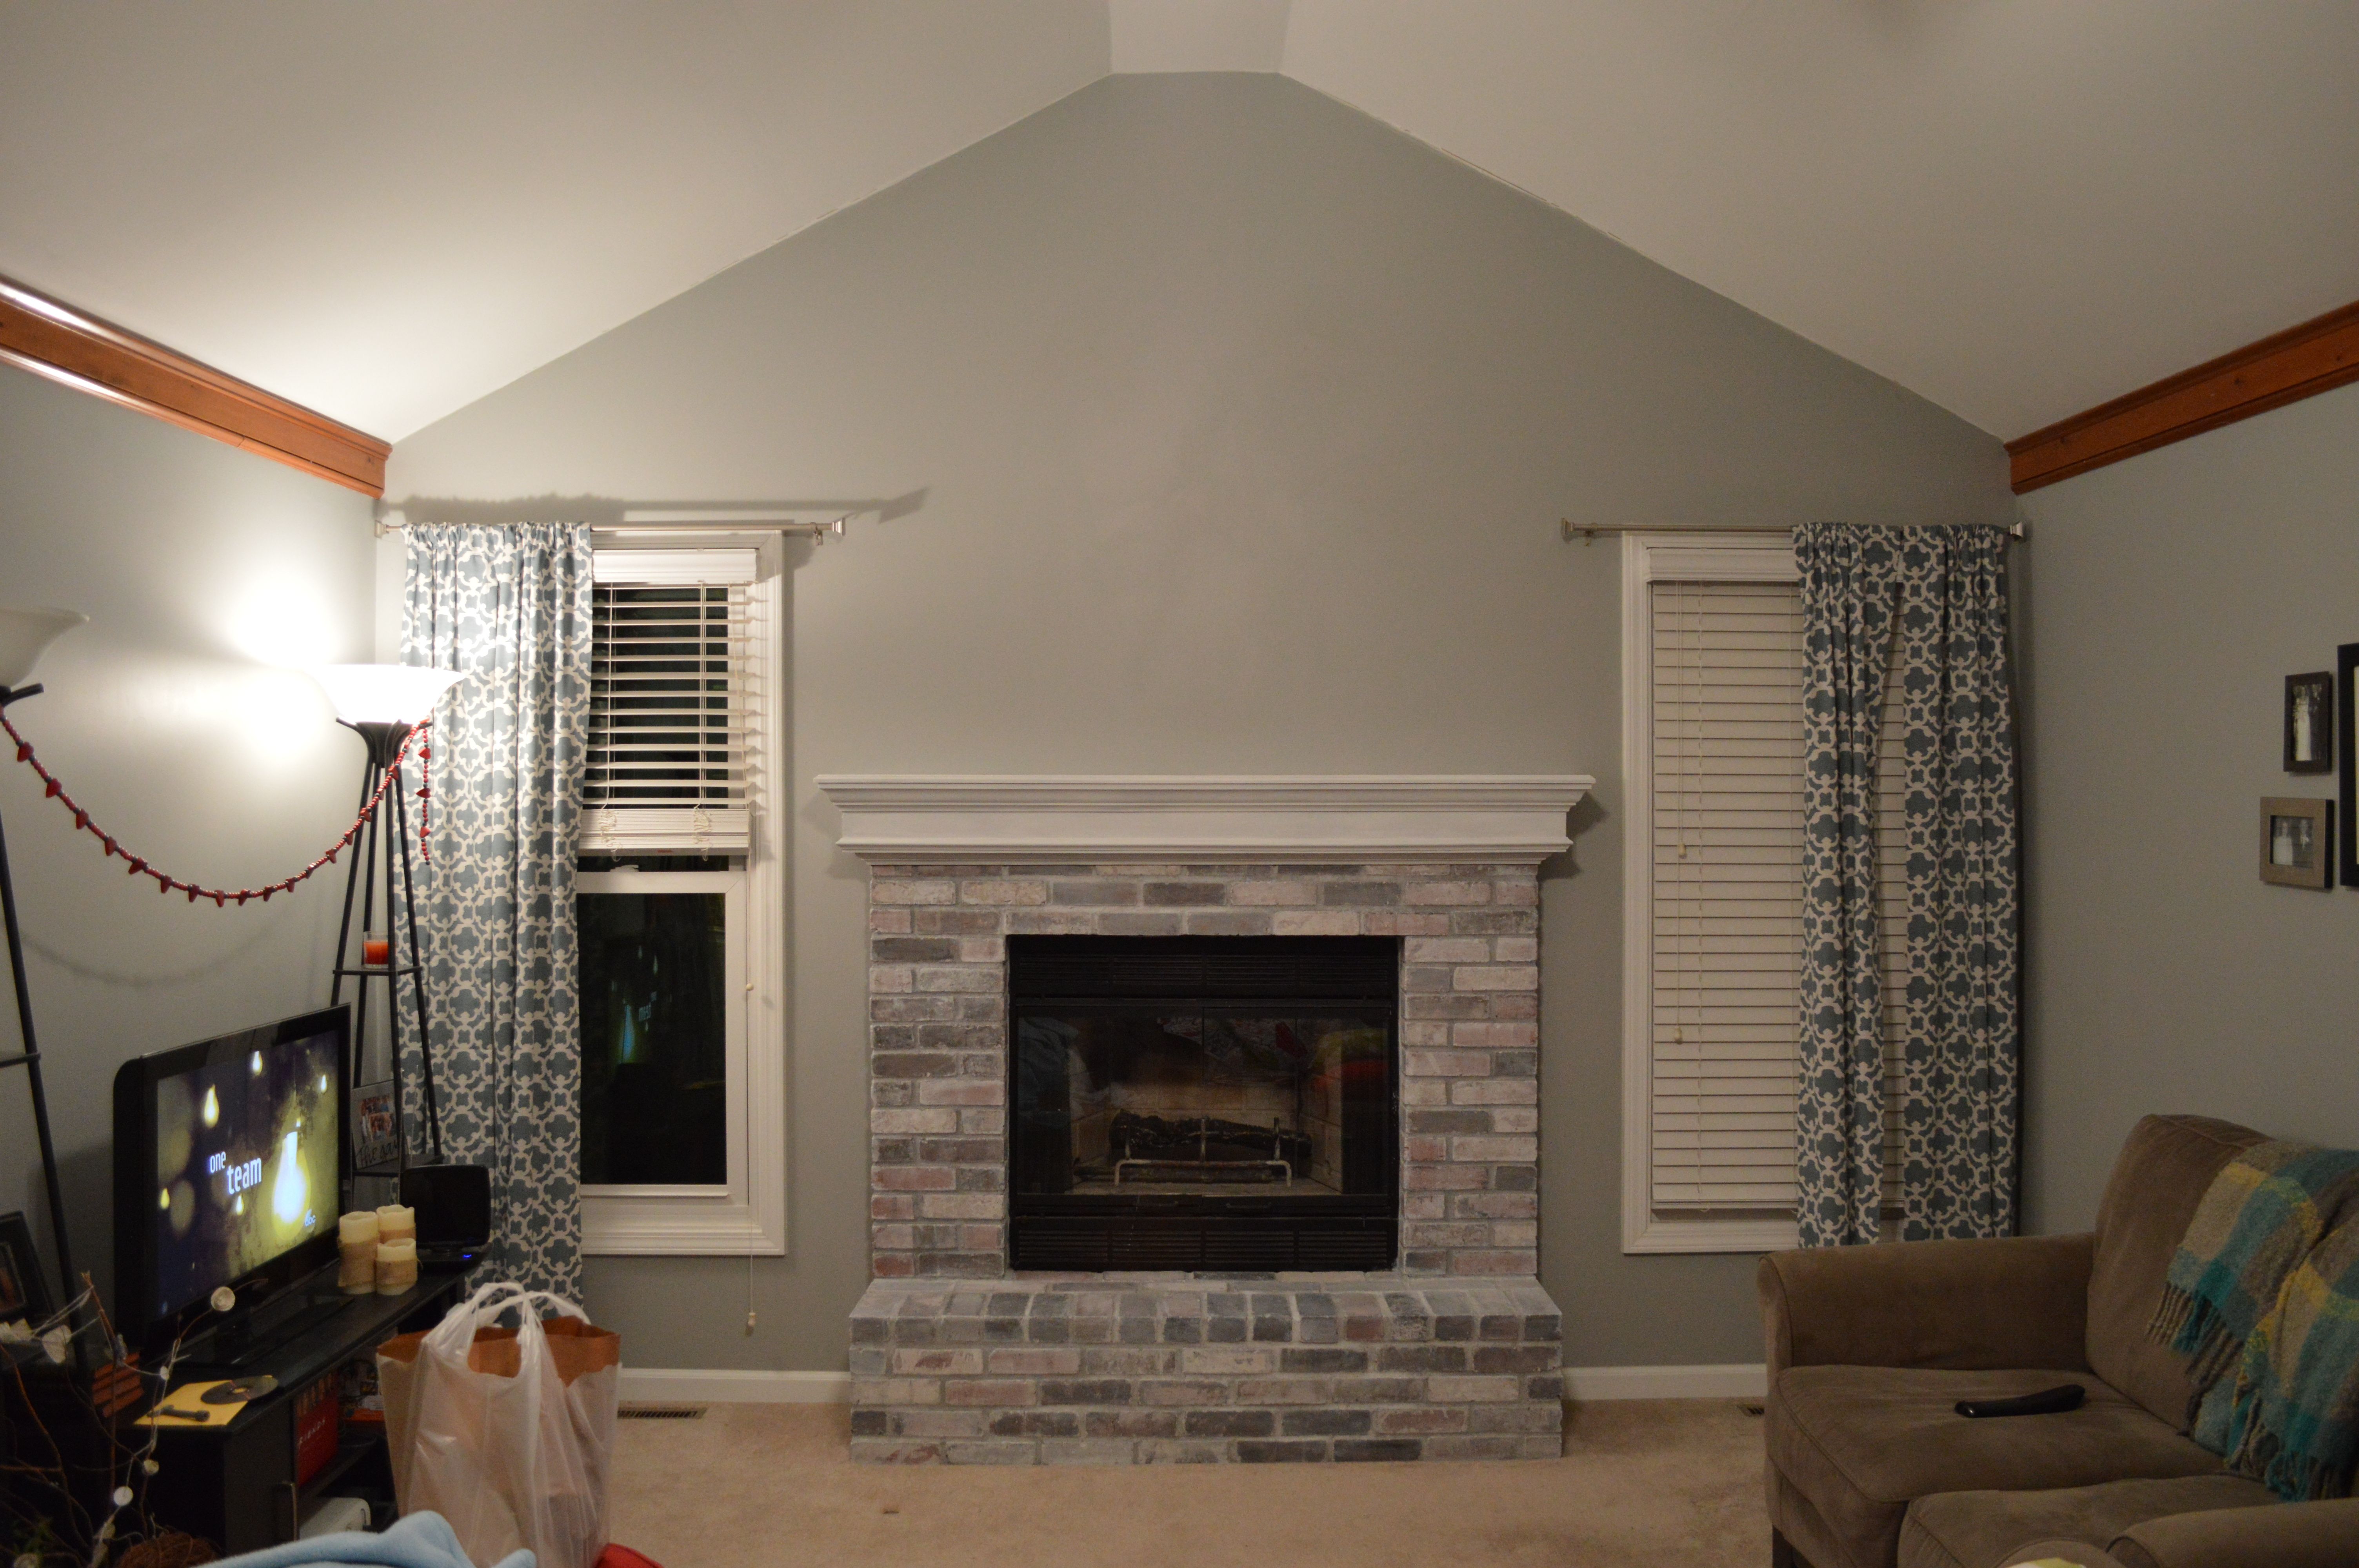 Brick Fireplace Ideas Lovely How to Whitewash Brick Our Fireplace Makeover Loving